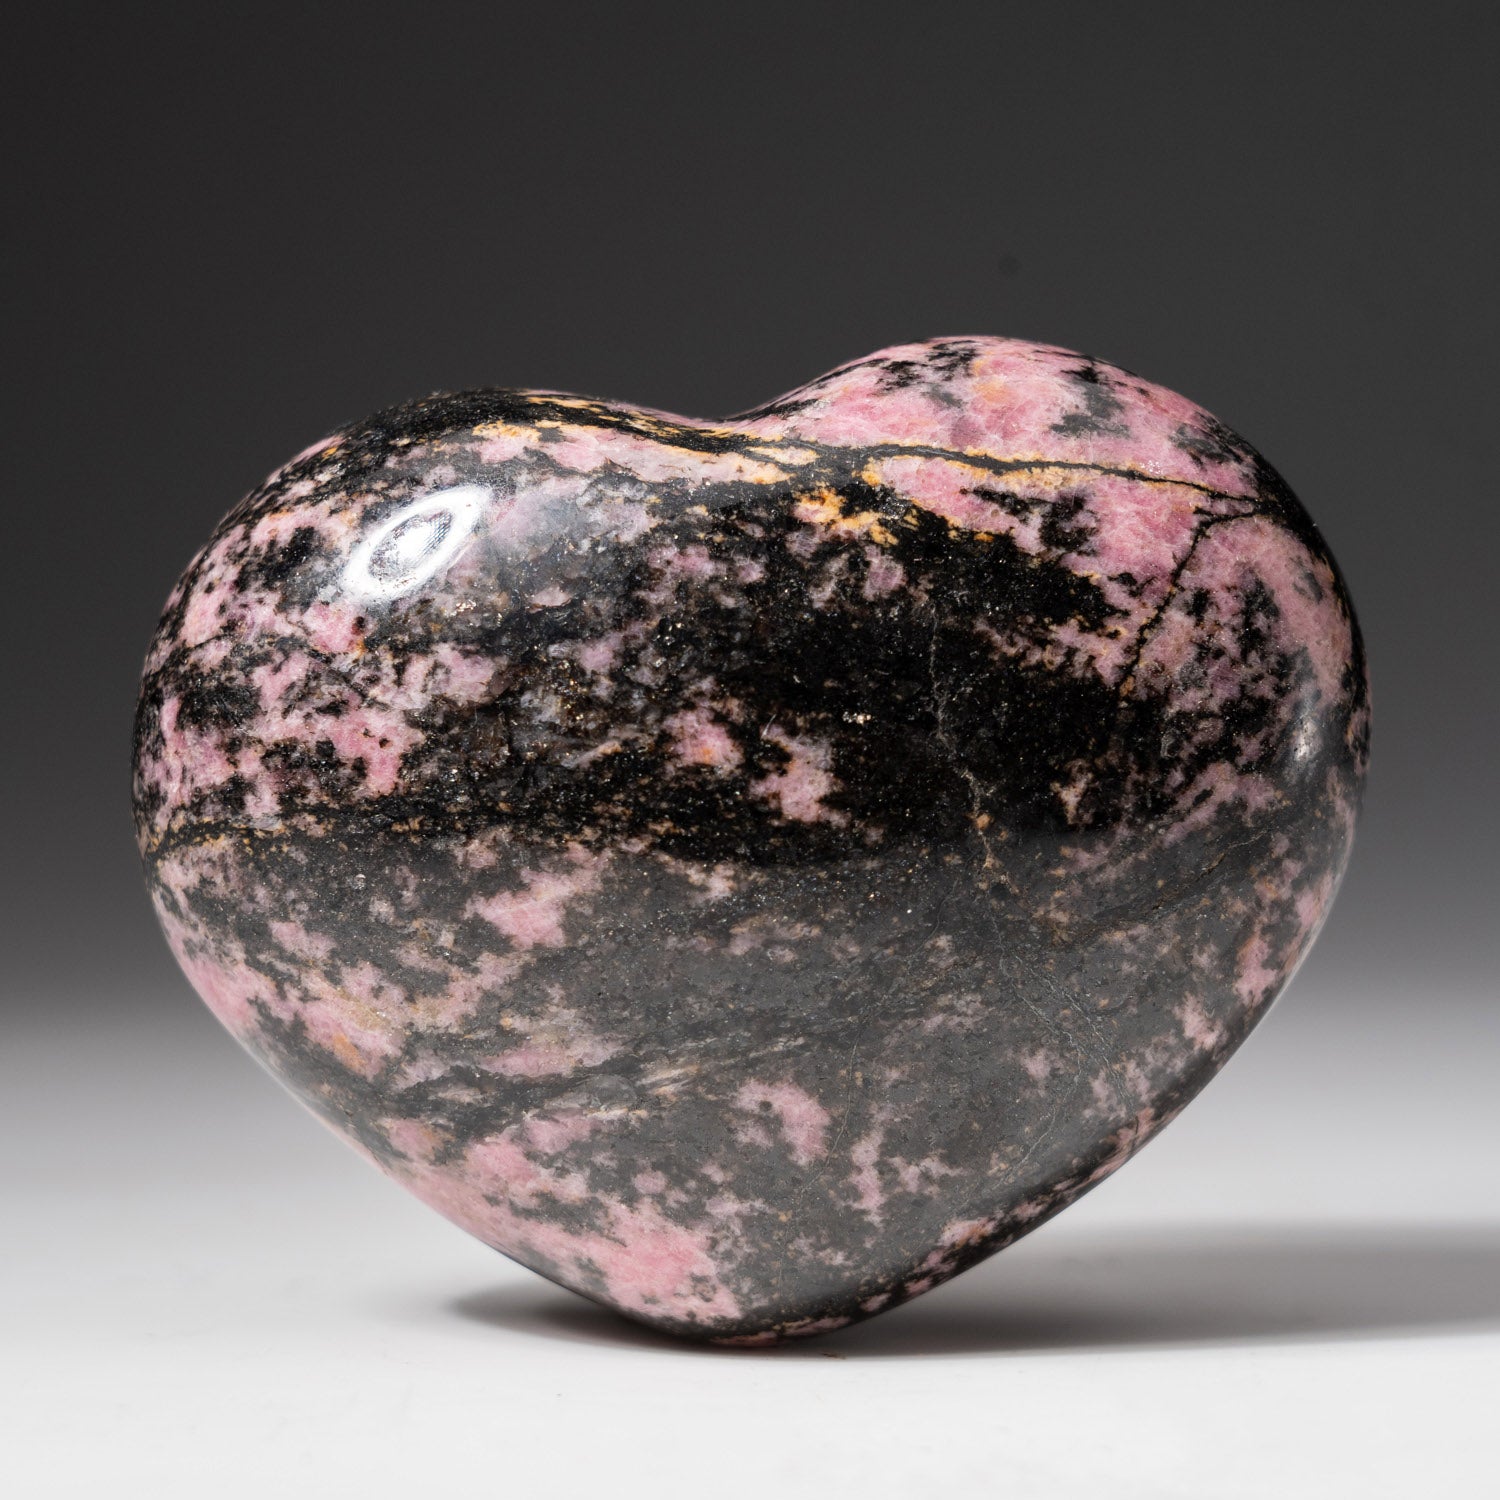 Polished Imperial Rhodonite Heart from Madagascar (400 grams)